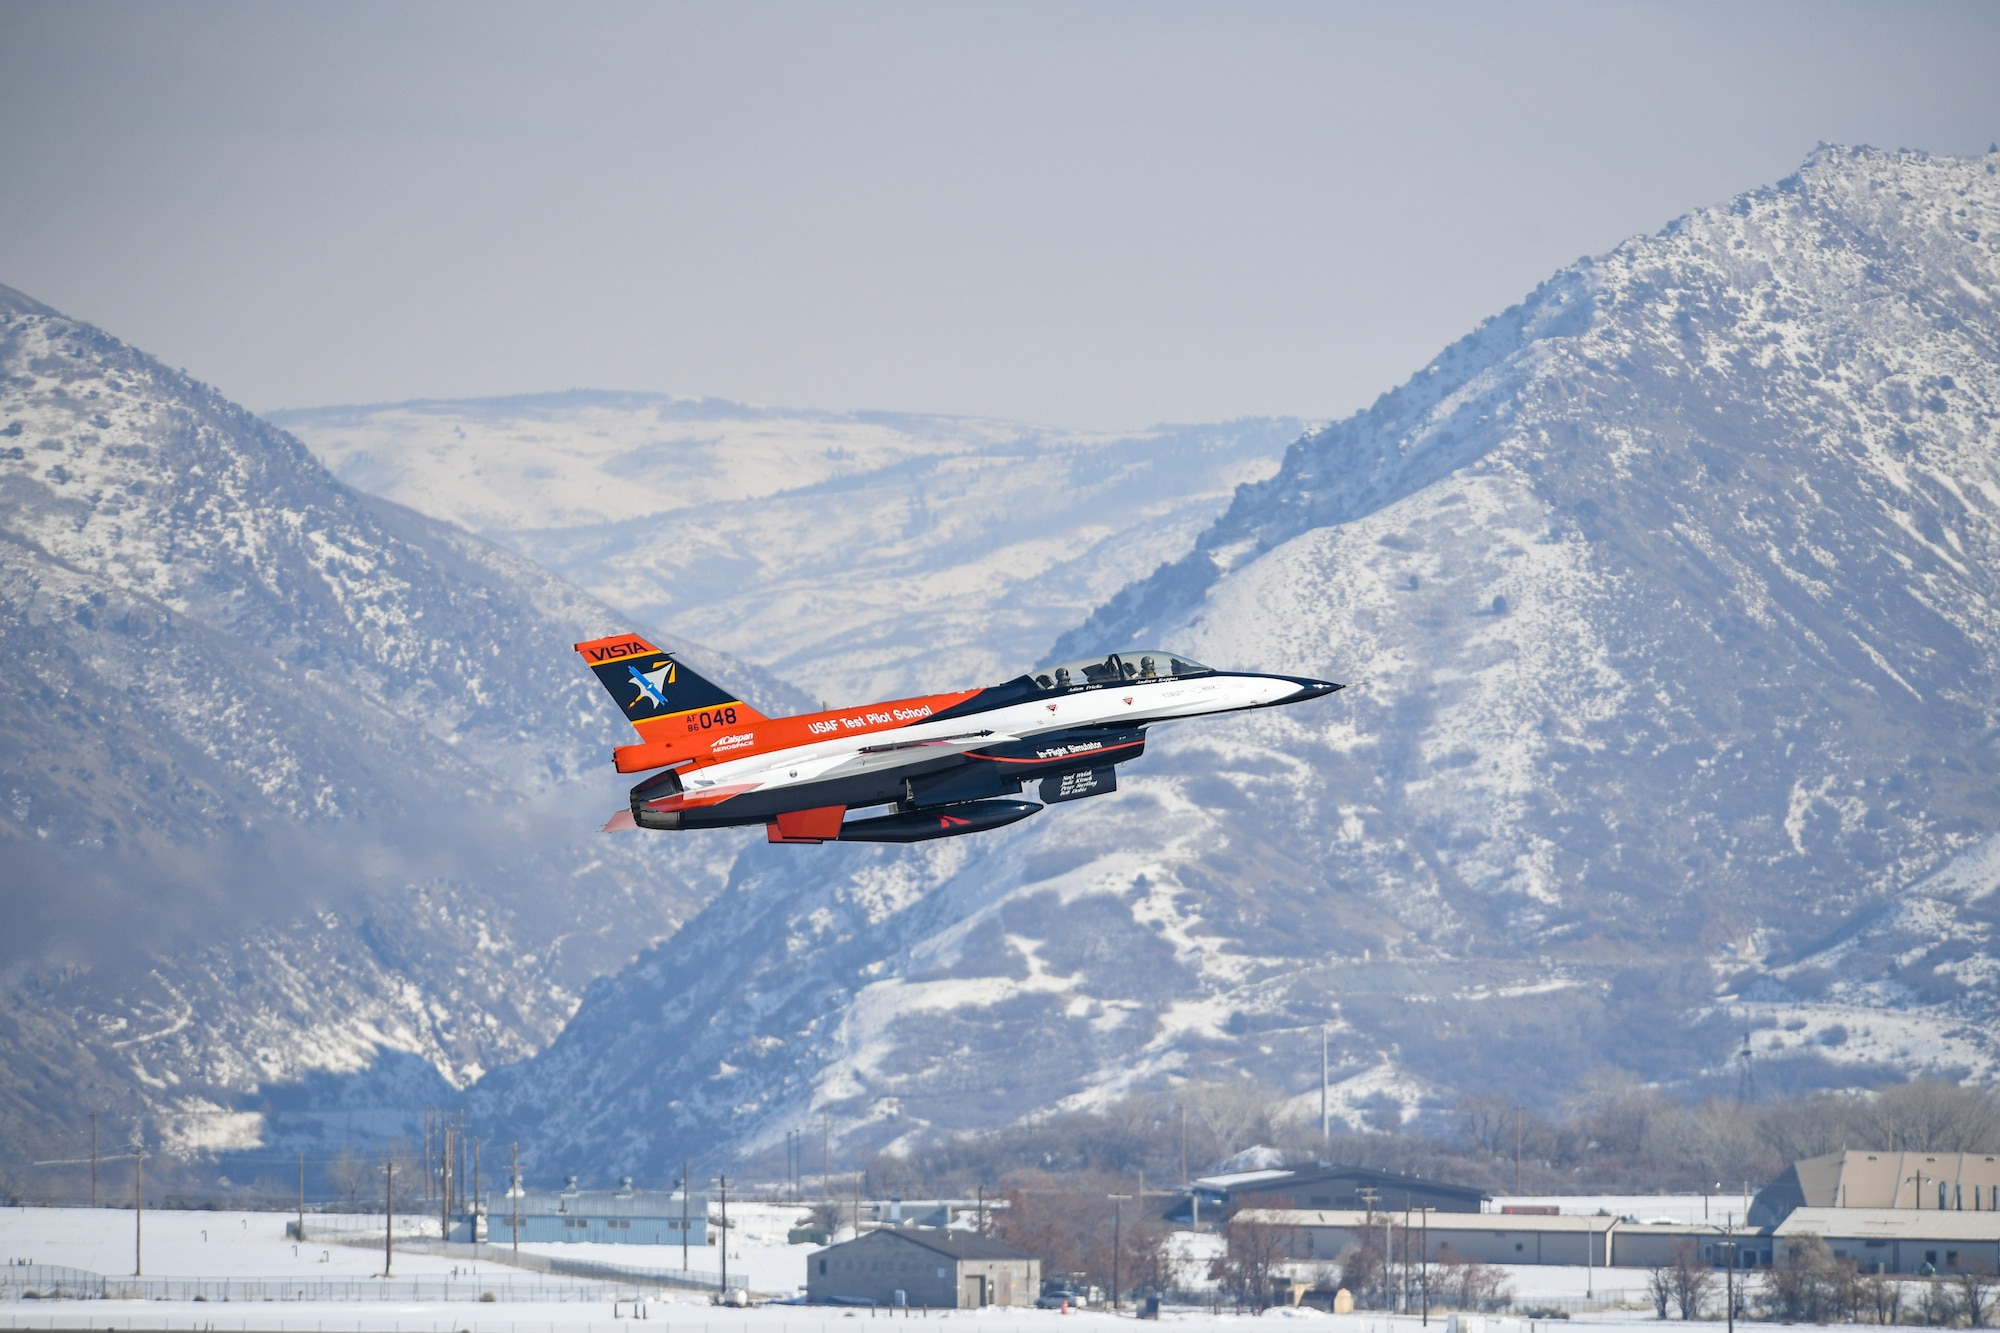 190130-F-EF974-2103- After recently receiving a new look and modifications at the Ogden Air Logistics Complex, the NF-16D known as VISTA (Variable stability In-flight Test Aircraft), departs Hill Air Force Base, Utah, Jan. 30, 2019.  The aircraft is the only one of its kind in the world and is the flag-ship of the U.S. Air Force Test Pilot School. It’s highly modified, allowing pilots to change the aircraft’s flight characteristics and stability to mimic that of other aircraft.  (U.S. Air Force photo by Cynthia Griggs)